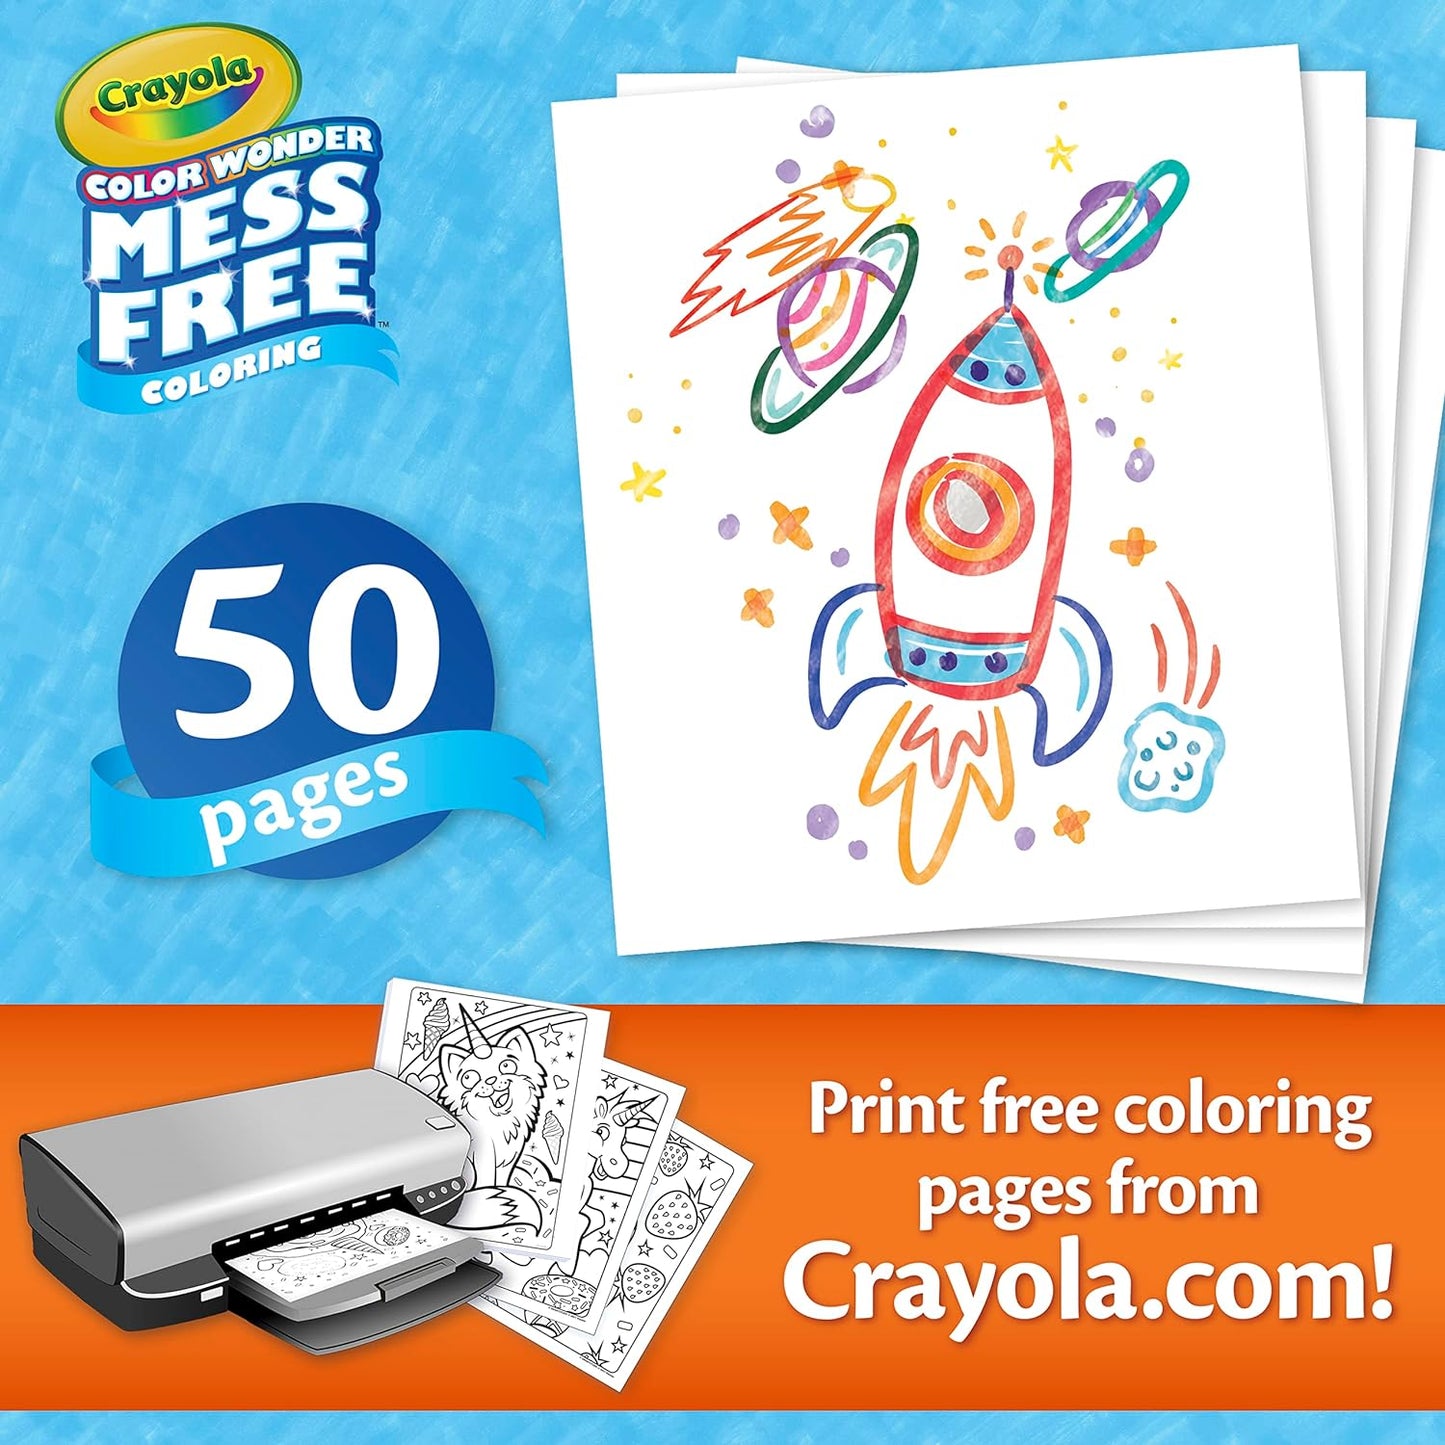 Crayola Color Wonder Blank Coloring Pages - 50 Pages